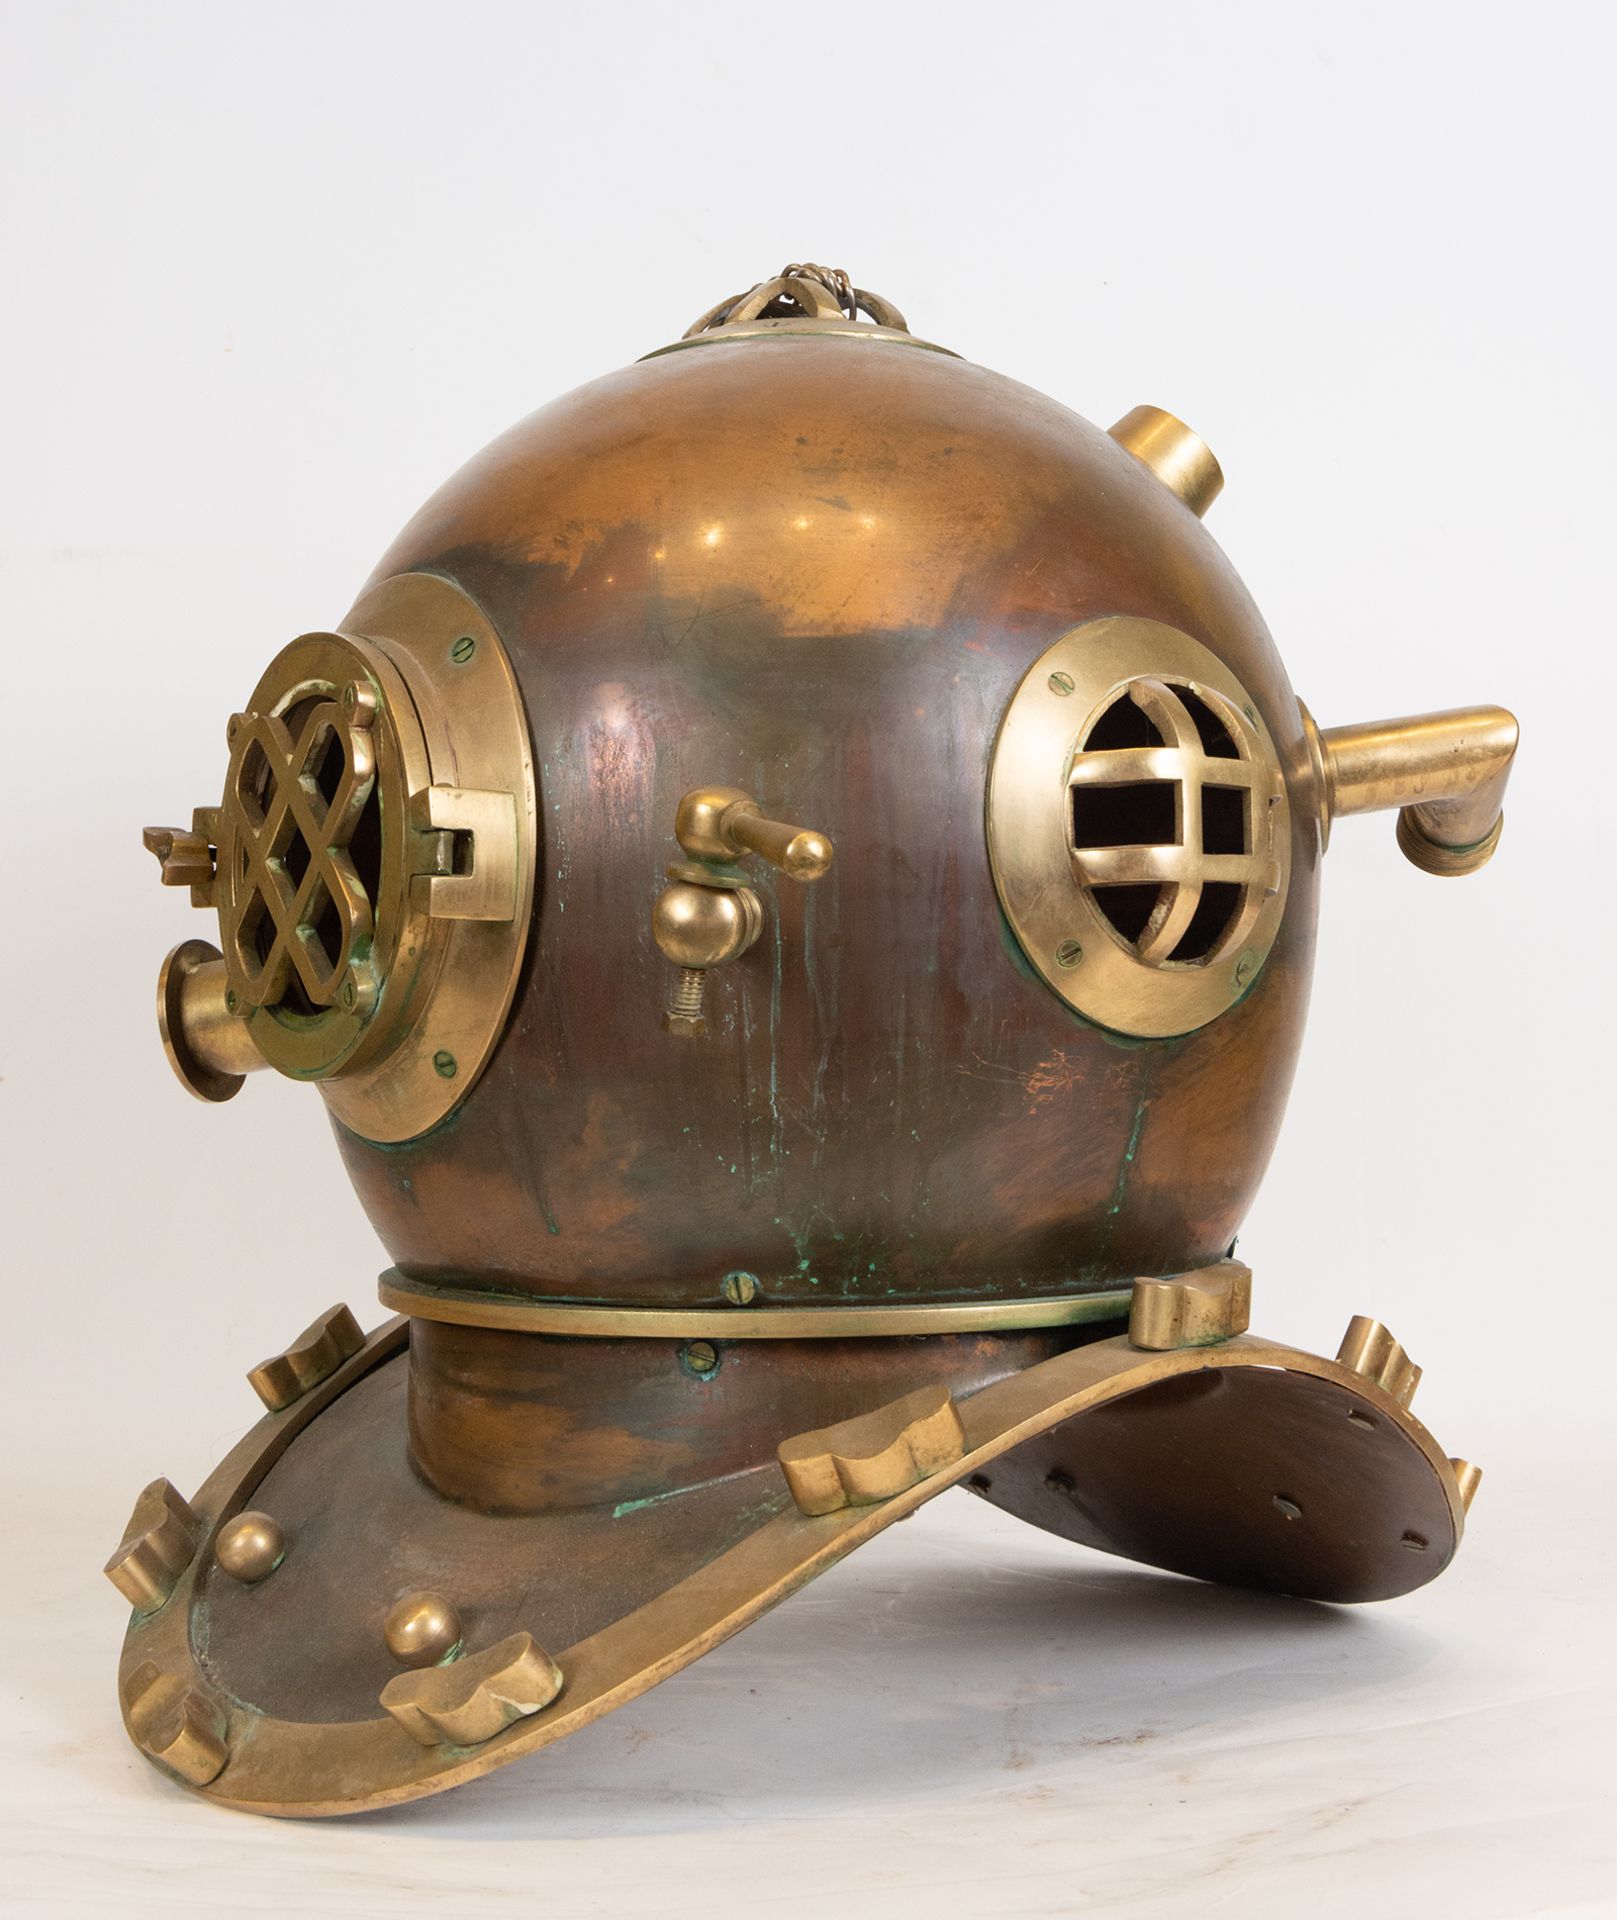 Rare Solid Bronze Diver's Helmet, Italy or England, late 19th century - early 20th century - Image 3 of 5